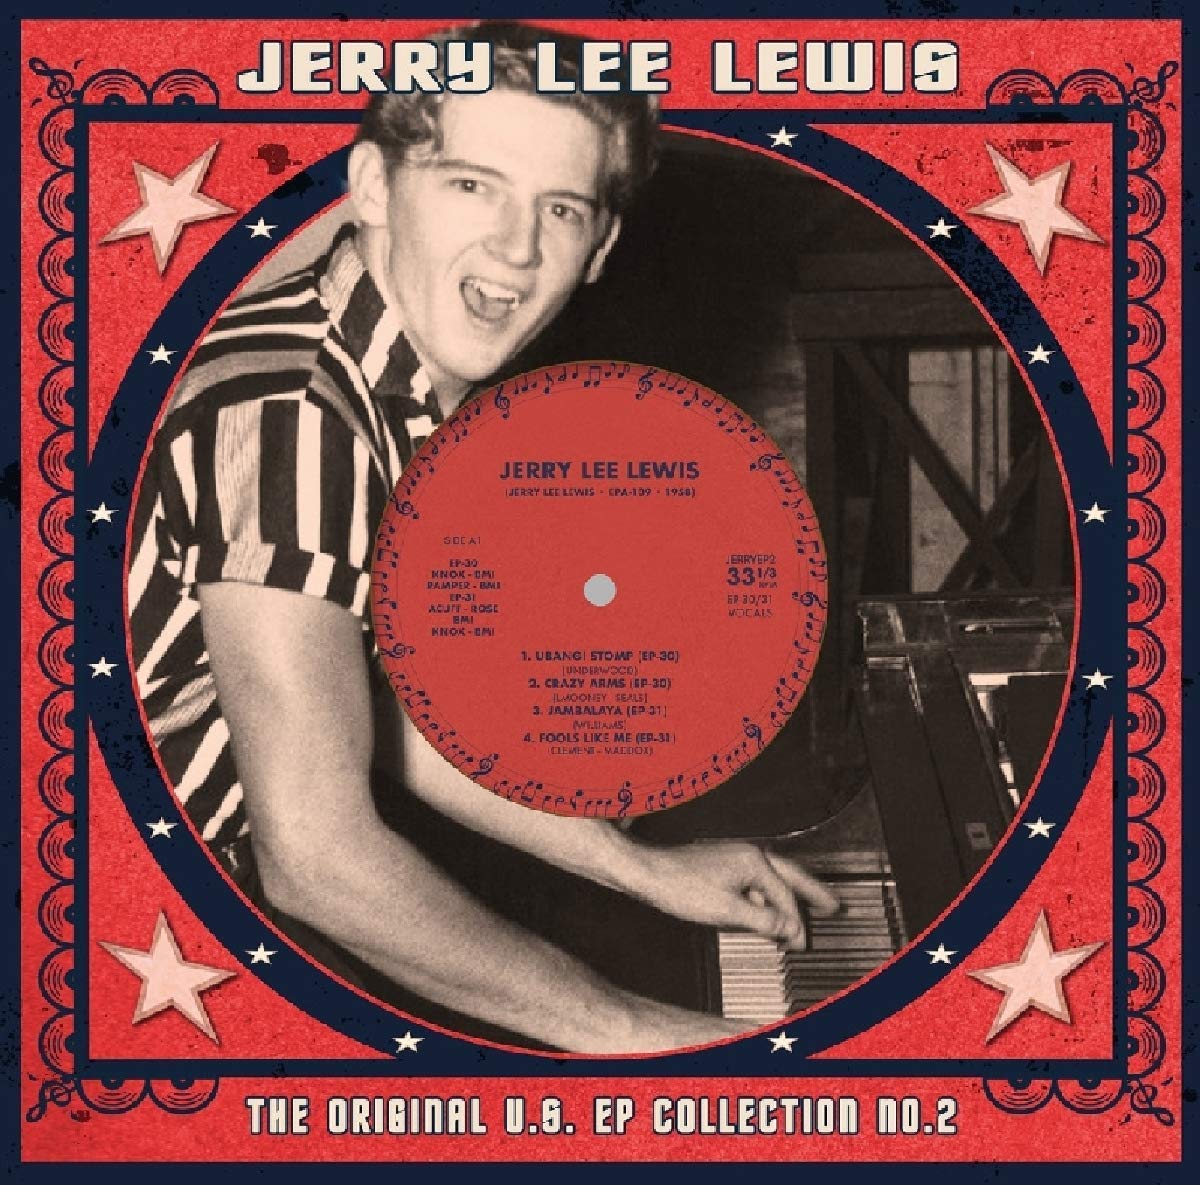 JERRY LEE LEWIS / ジェリー・リー・ルイス / THE ORIGINAL U.S. EP COLLECTION NO.2 (COLORED 10")